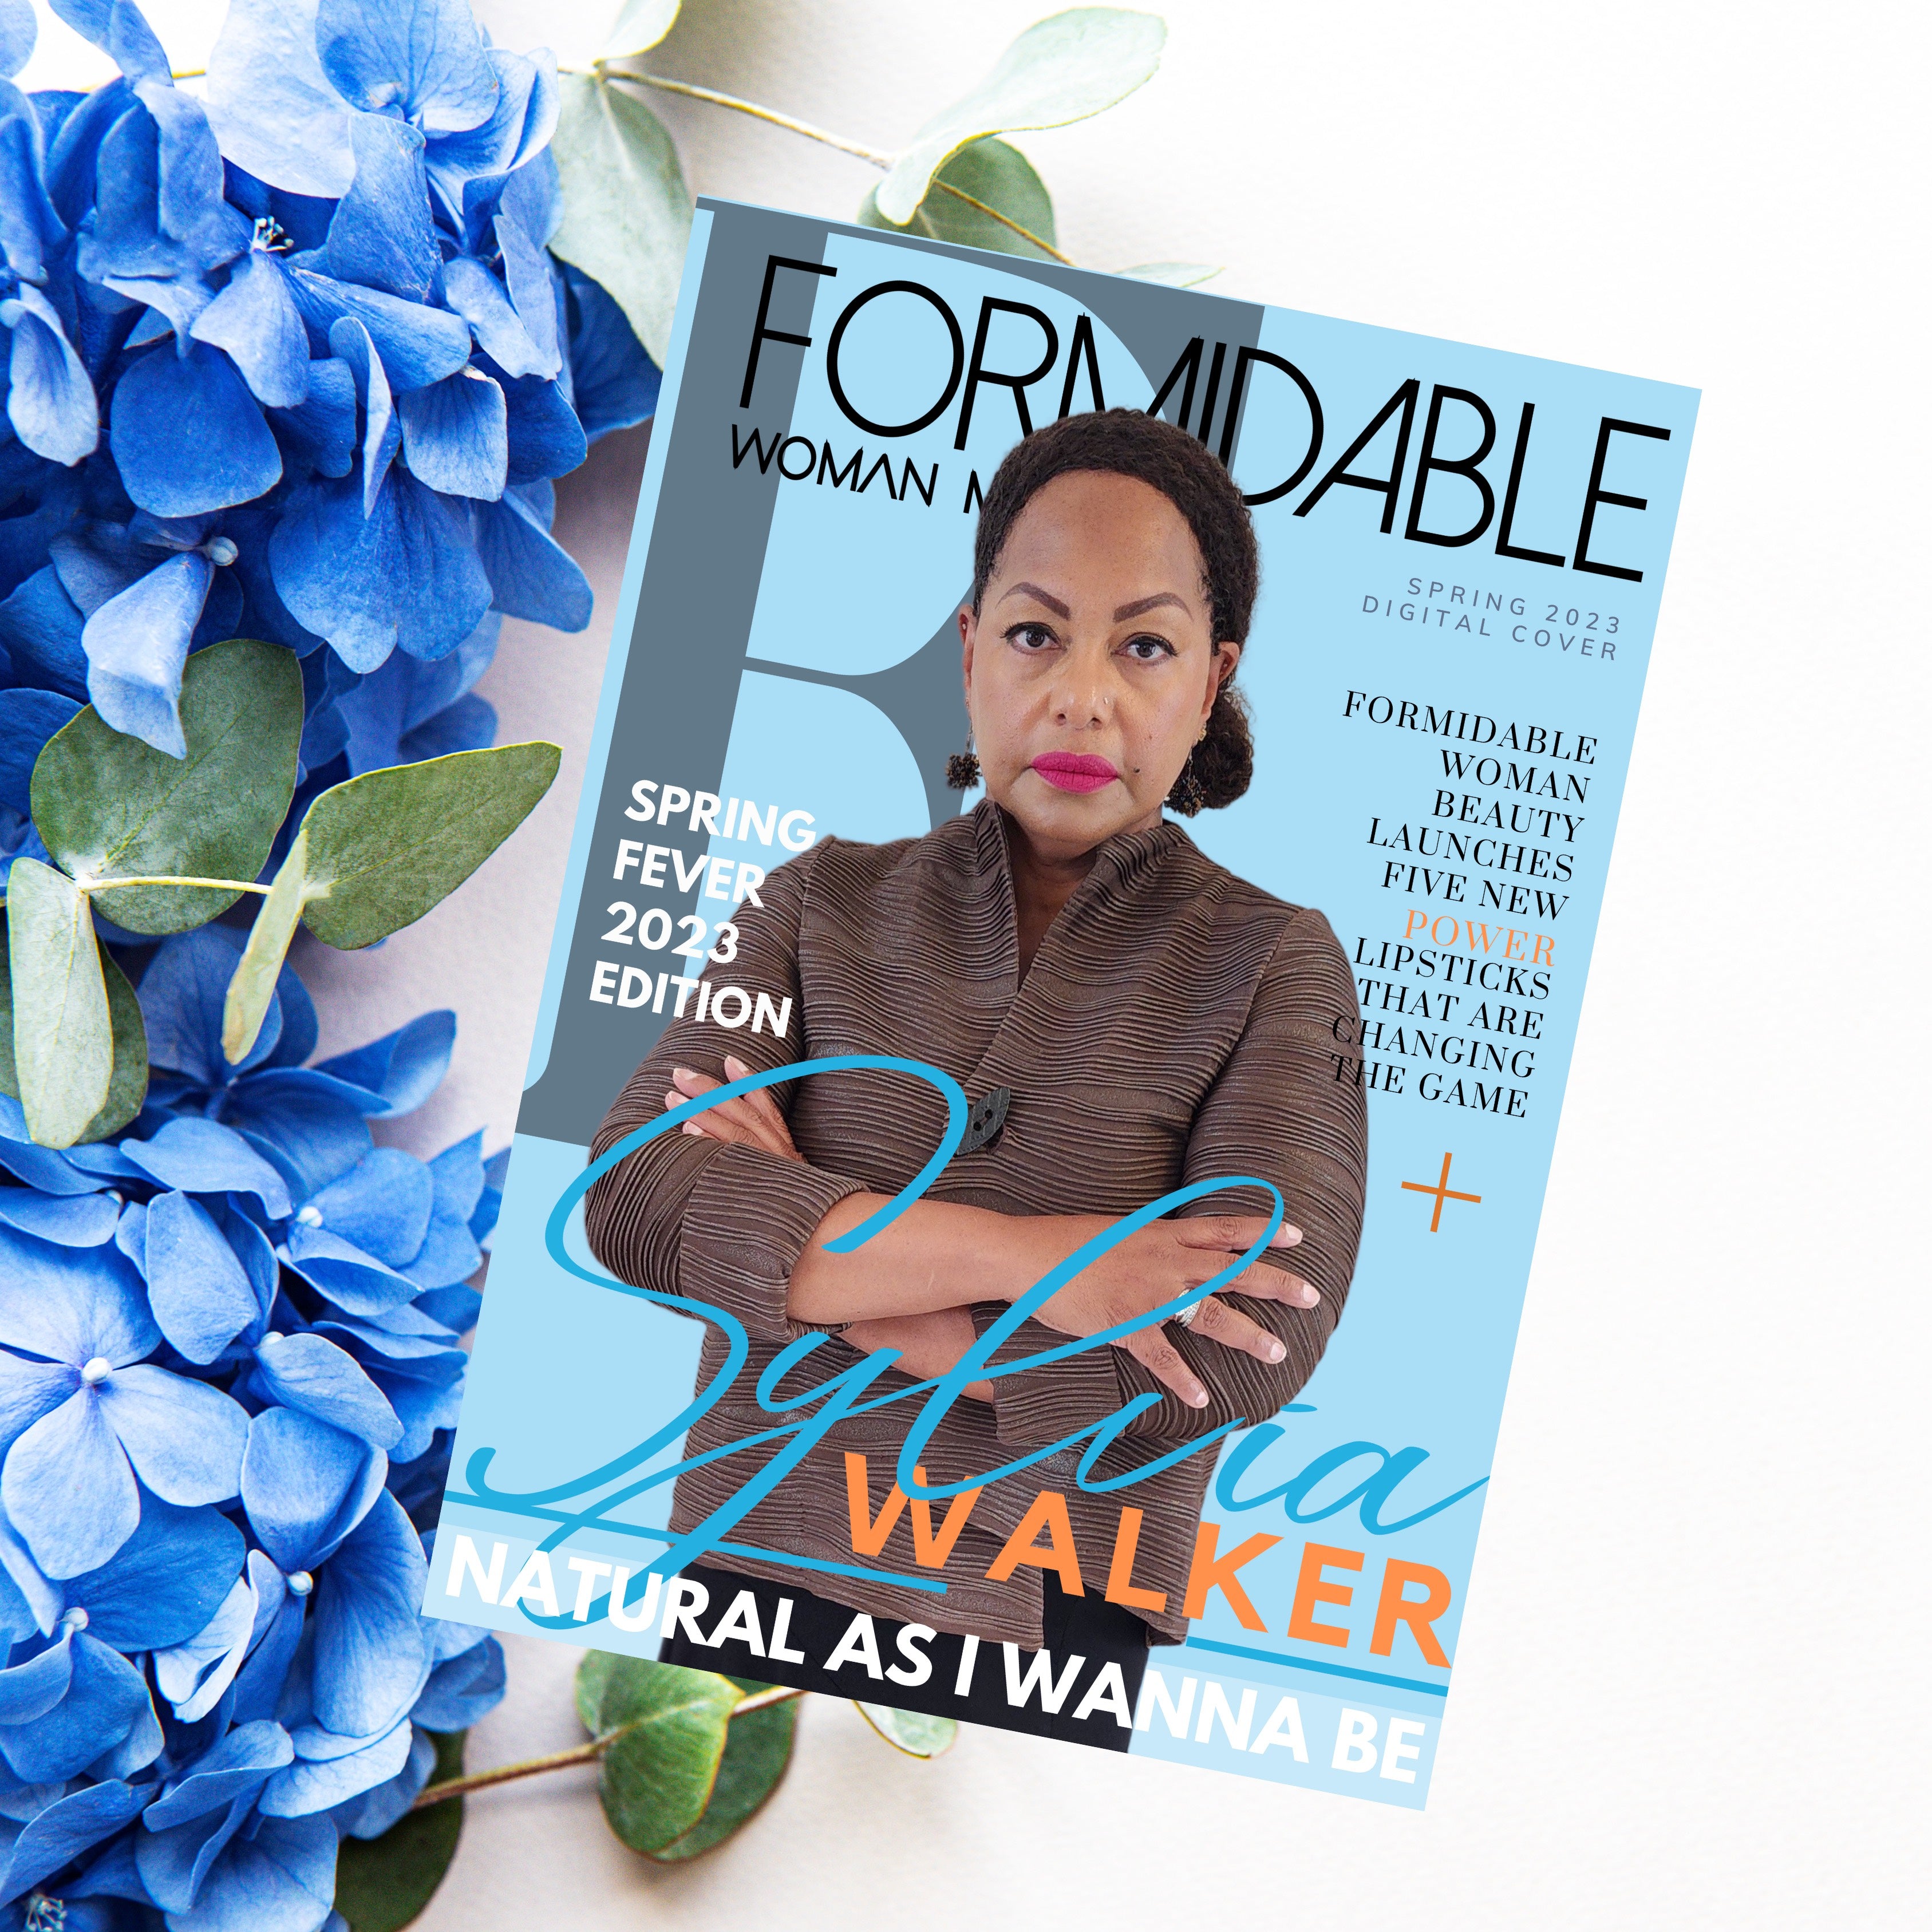 NAIWBE | Sylvia Walker Interview in Formidable Woman Magazine